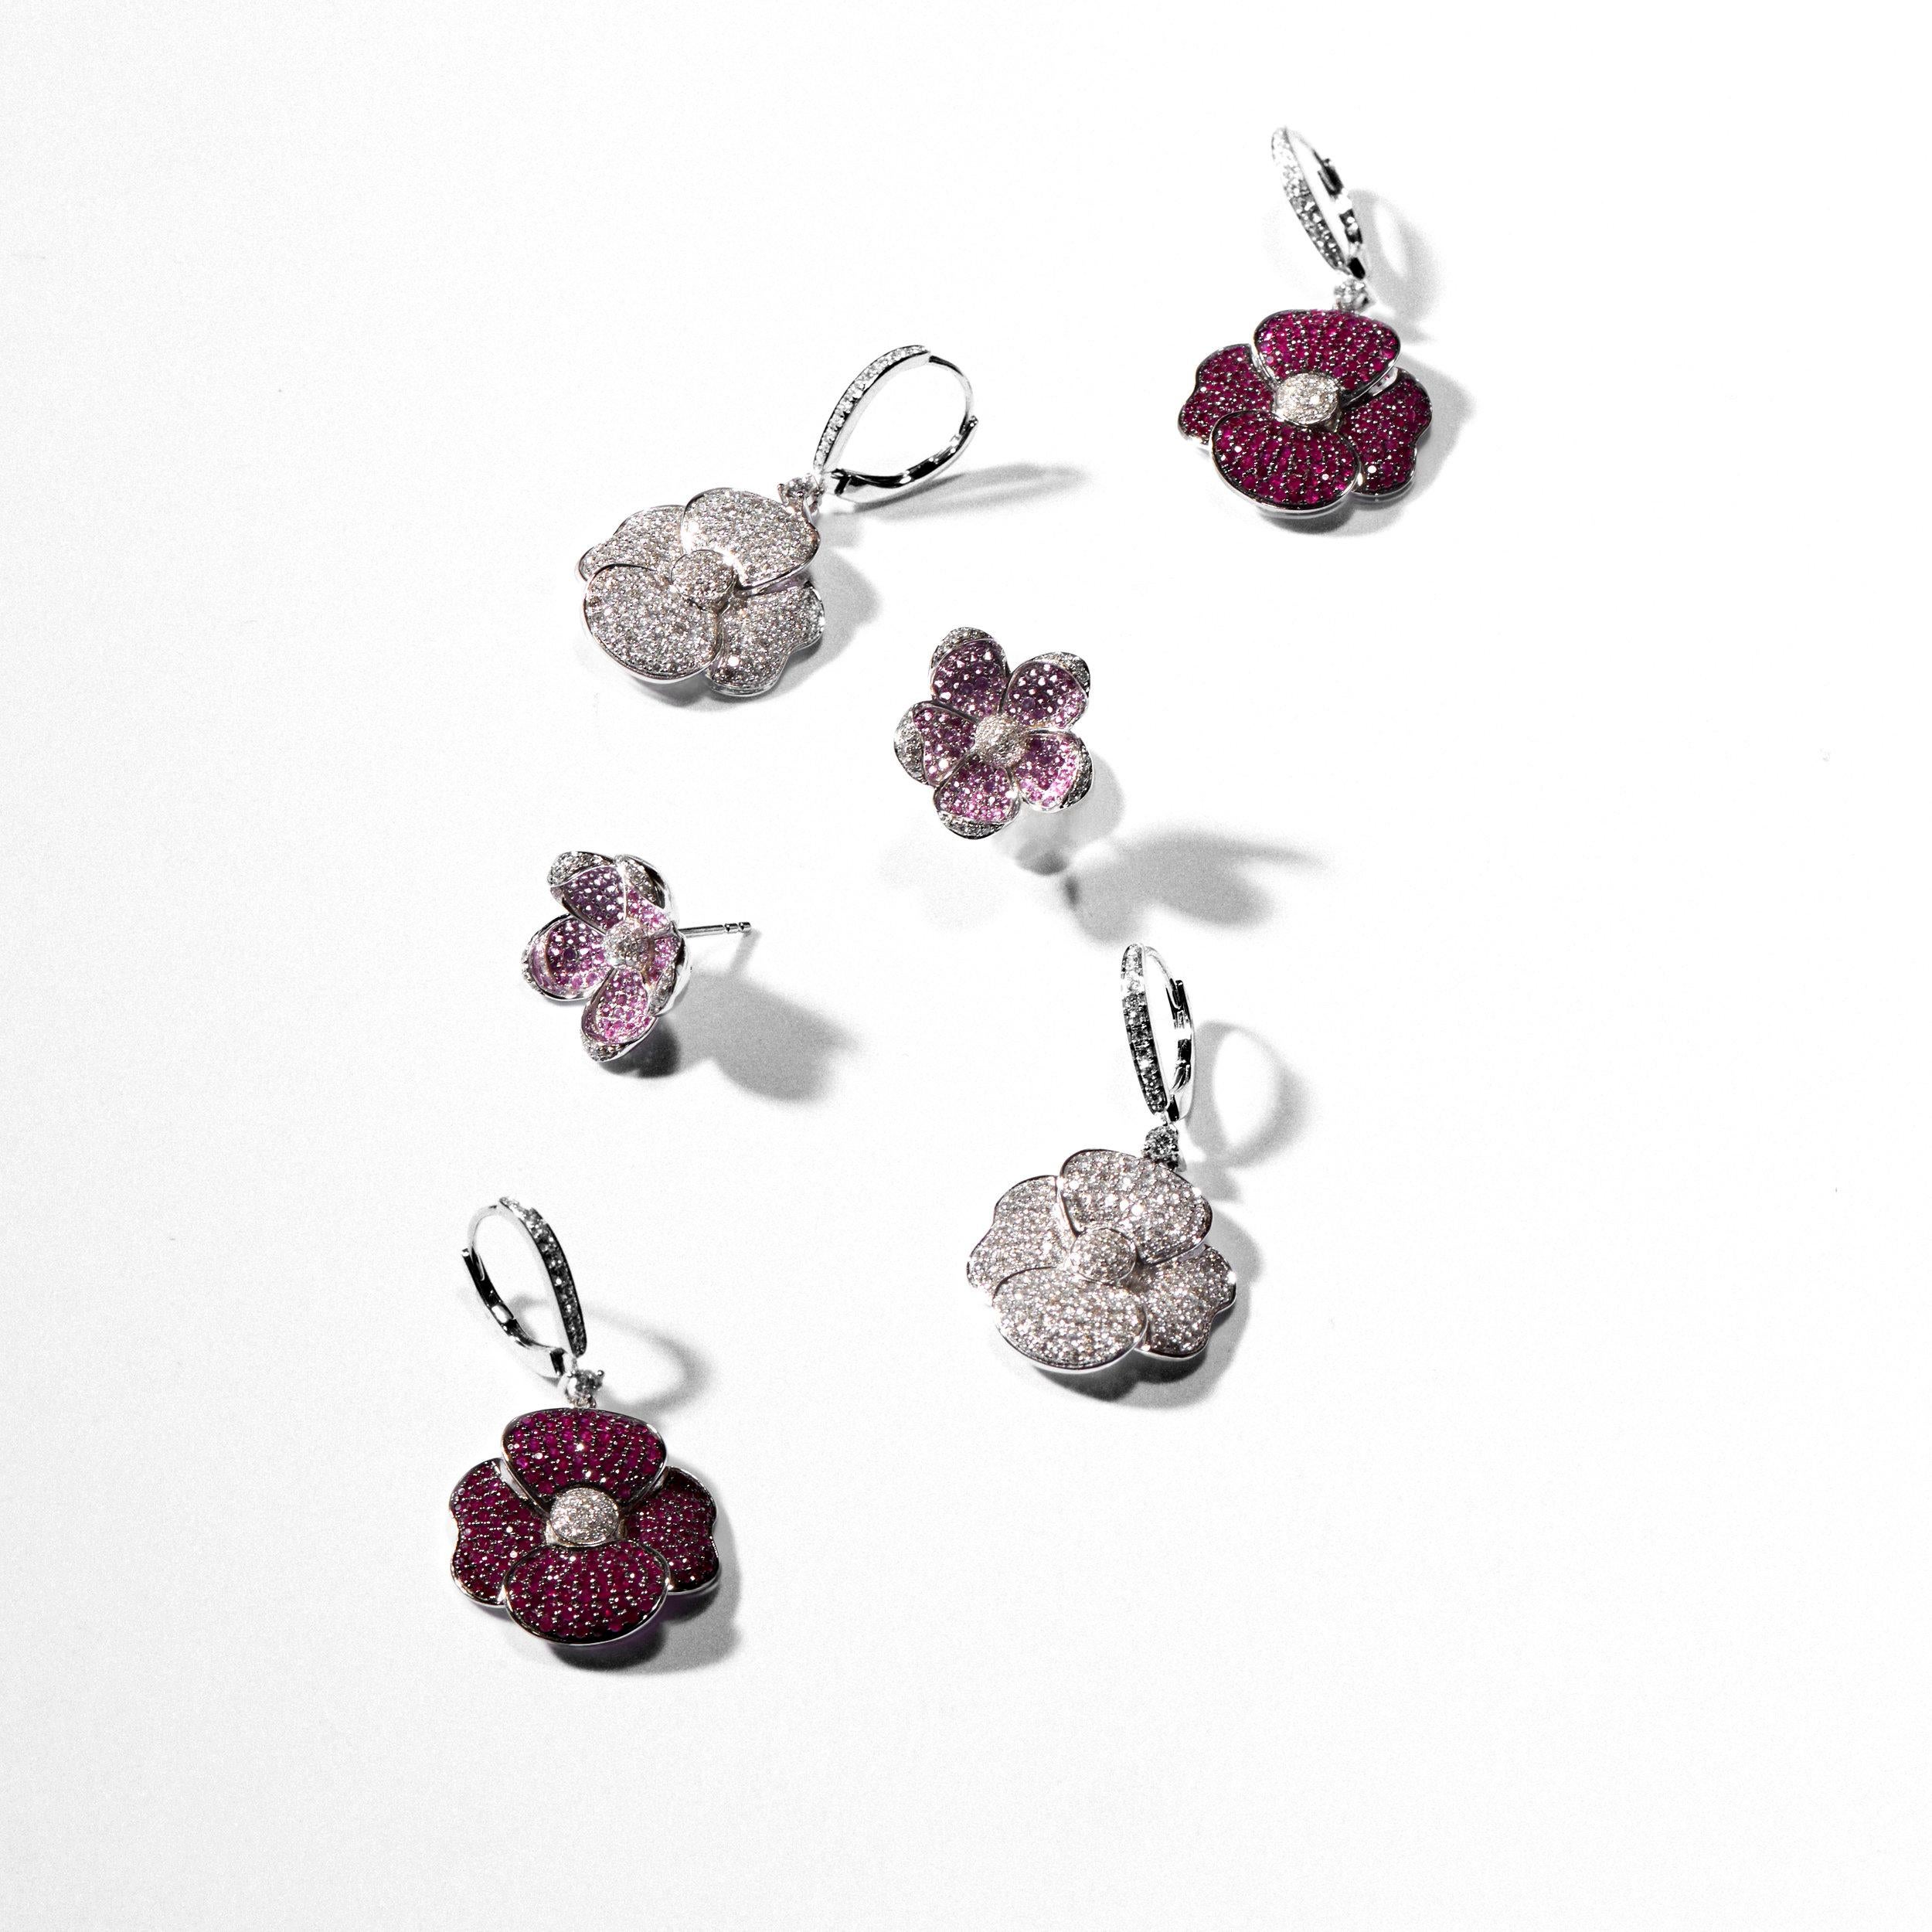 Like a blooming flower sparkling with brilliant color, the Poppy Ruby and Diamond Earrings add a dramatic element to any outfit. Featuring a floral motif design inspired by the classical beauty found in nature, these eye-catching earrings showcase